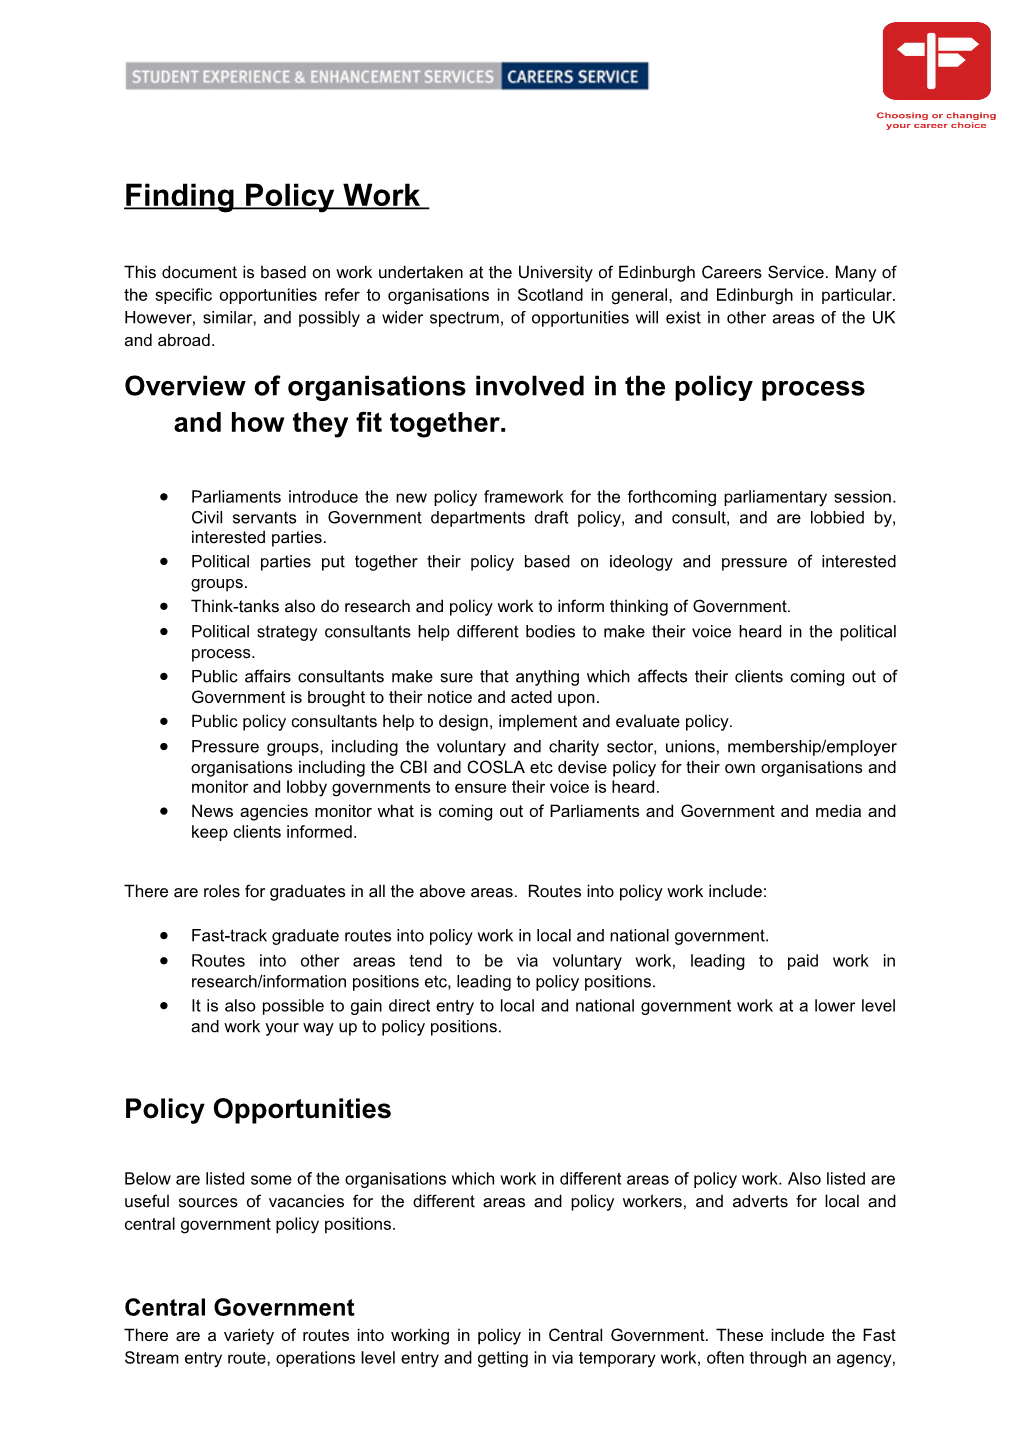 Overview of Organisations Involved in the Policy Process and How They Fit Together